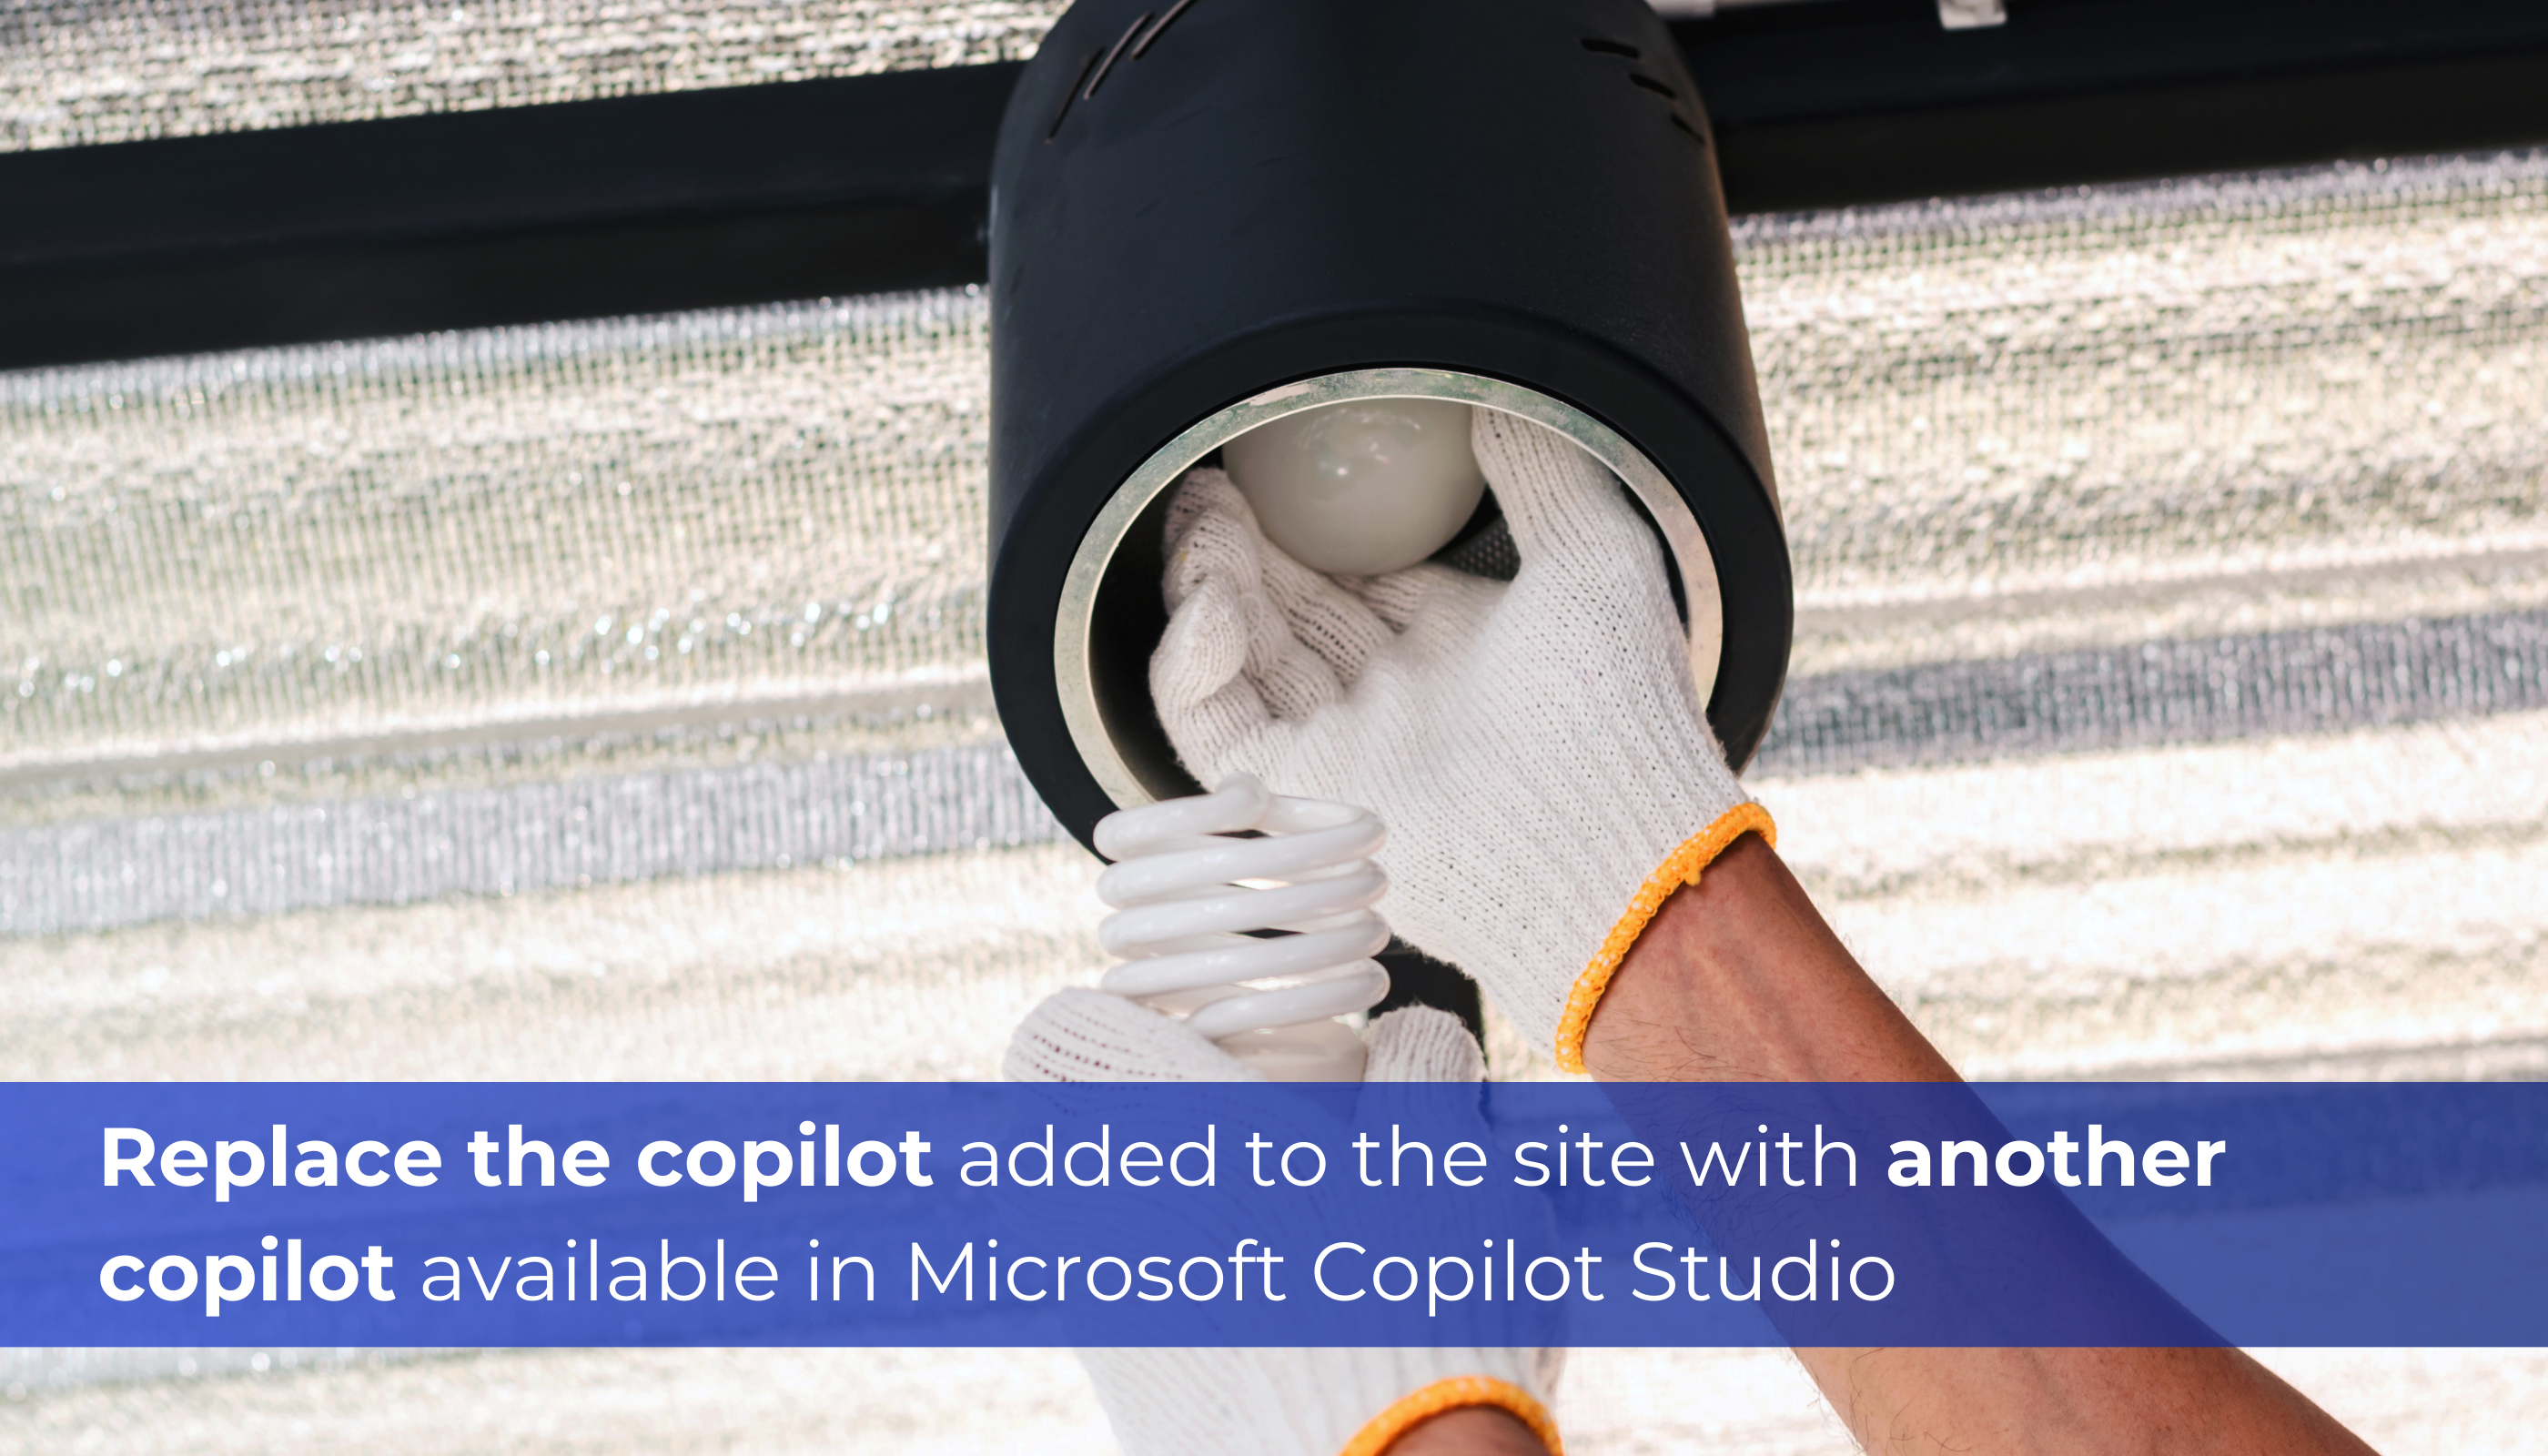 Replace the copilot added to the site with another copilot available in Microsoft Copilot Studio